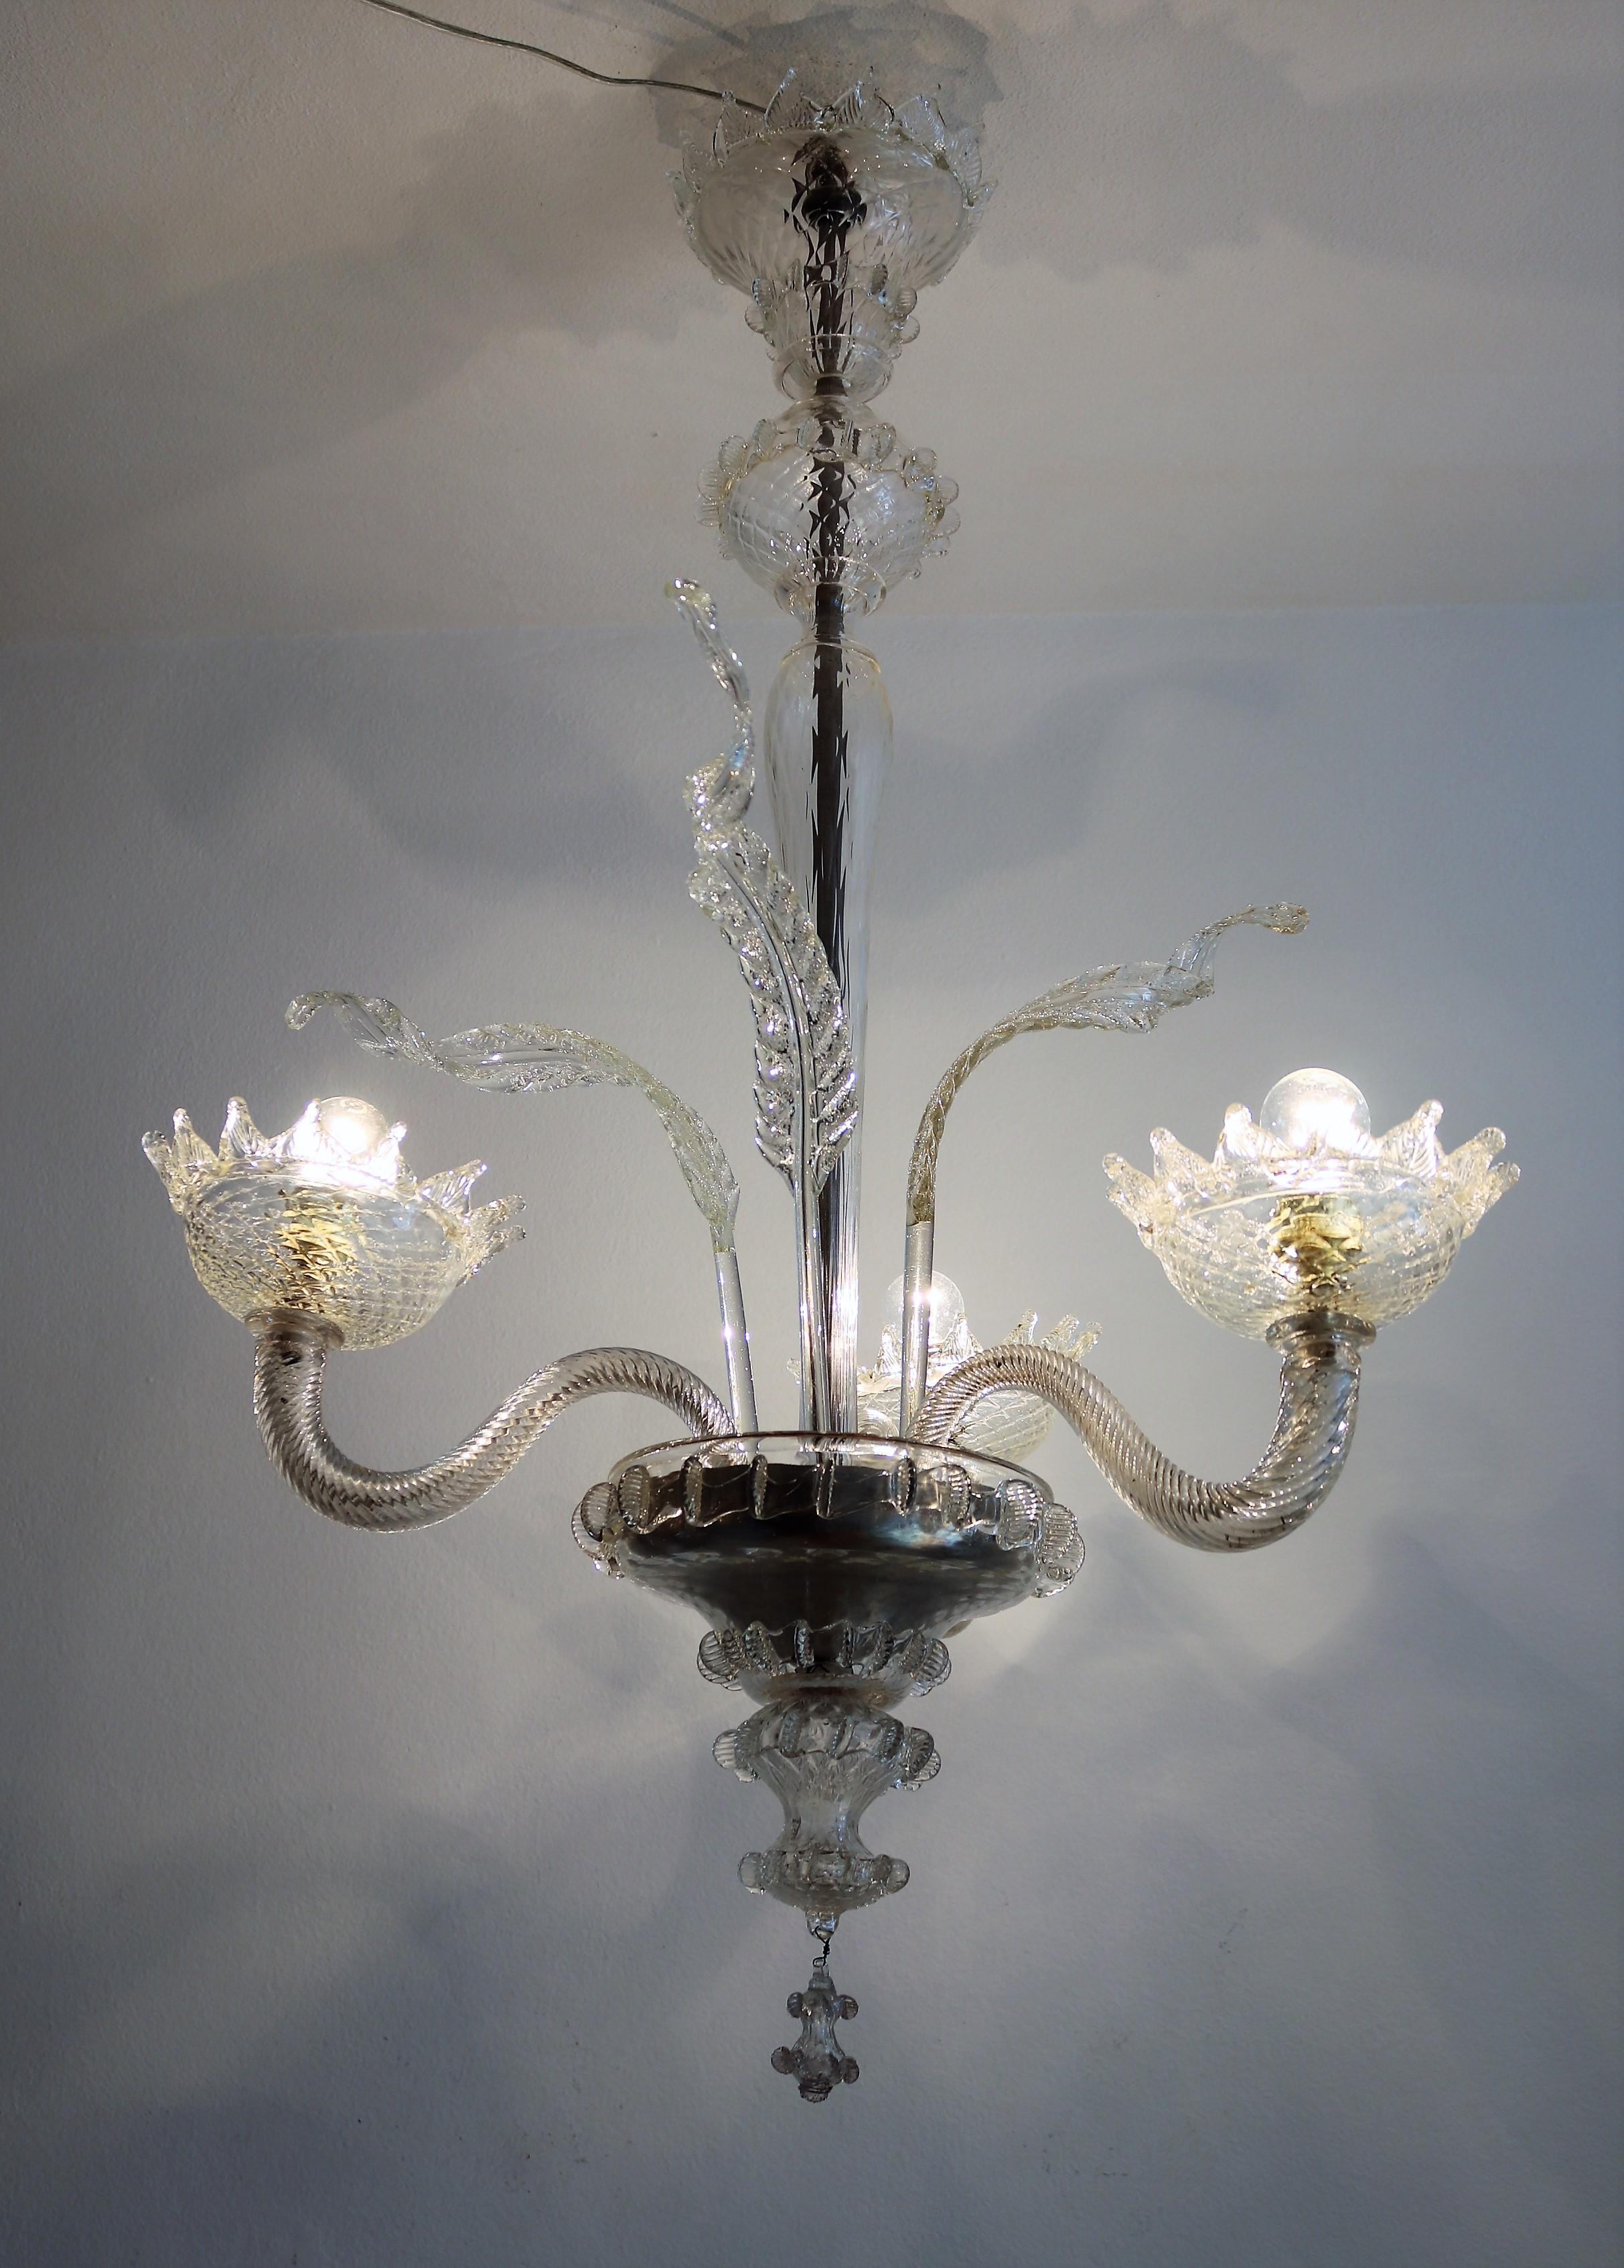 Beautiful true vintage chandelier with up-going arms and light bulbs inside beautifully handcrafted glass bowls.
Made in Murano, Italy, during the 1950s.
The chandelier is in transparent color with light shades of off-white - cream in some